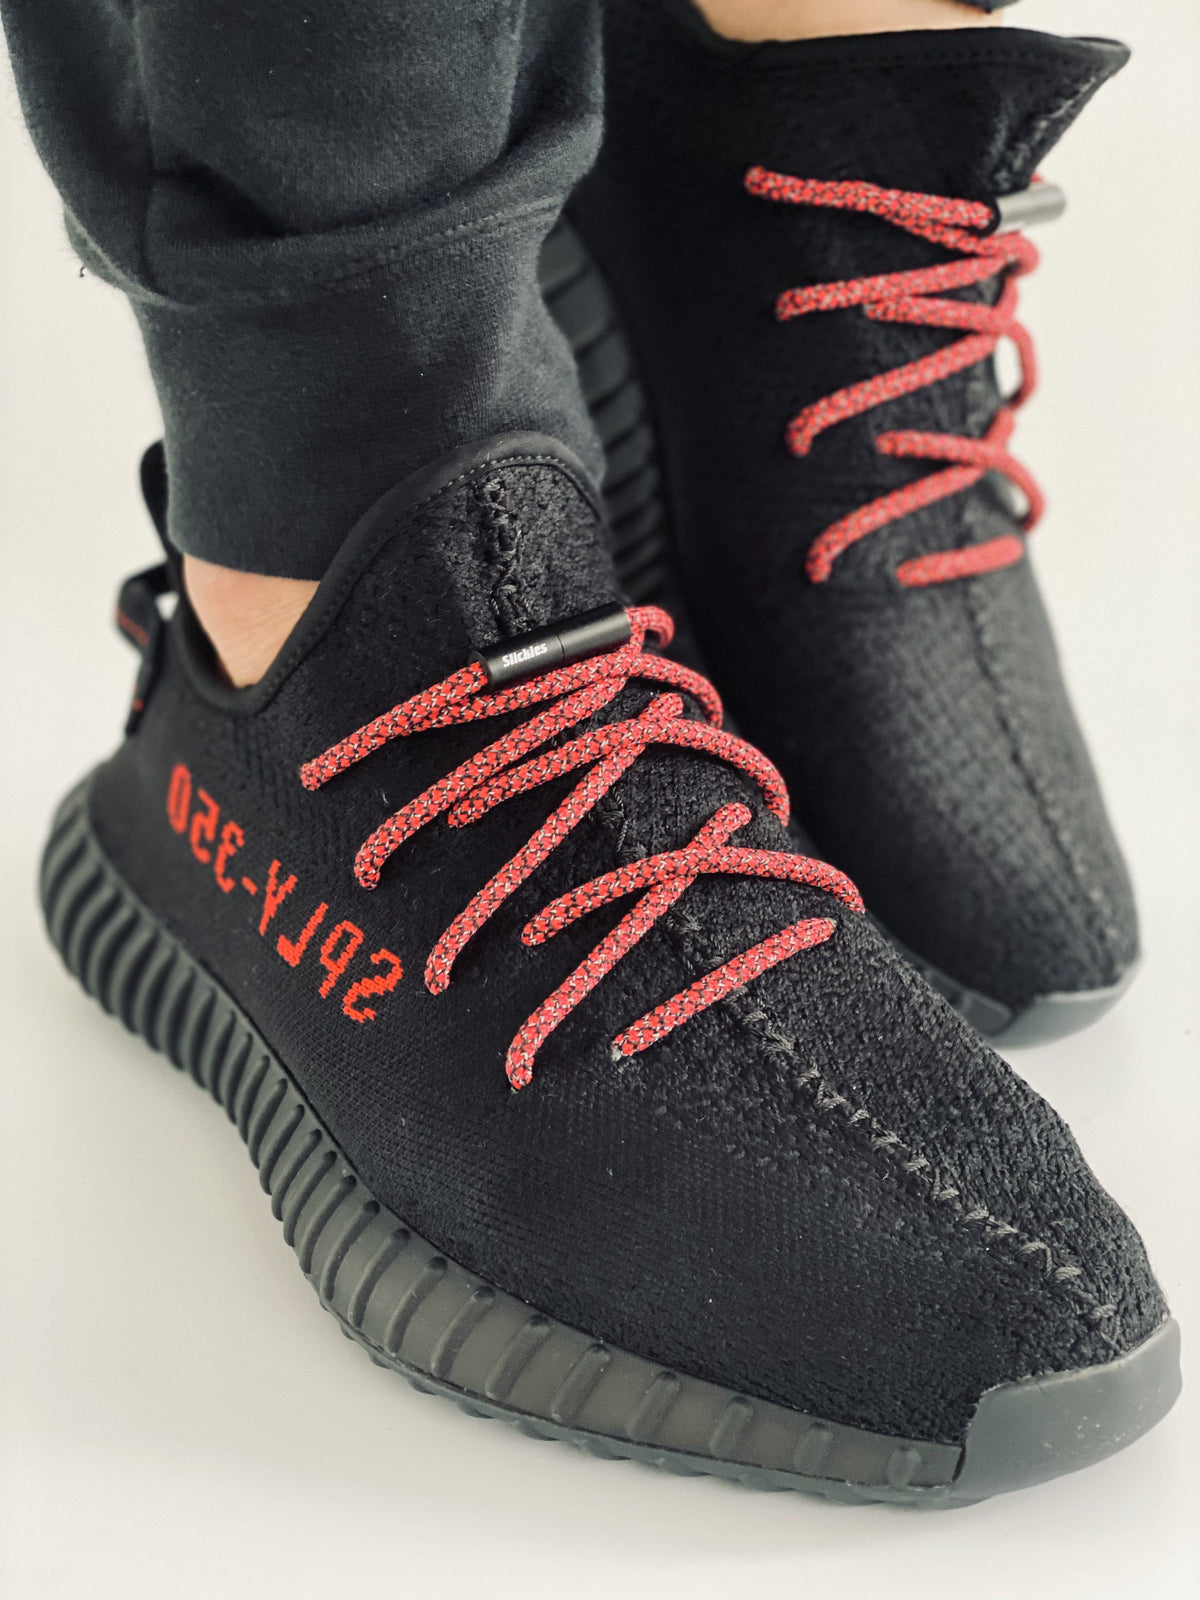 Yeezy Laces 3M Reflective Rope V2 - BRED Black / Red - Slickies